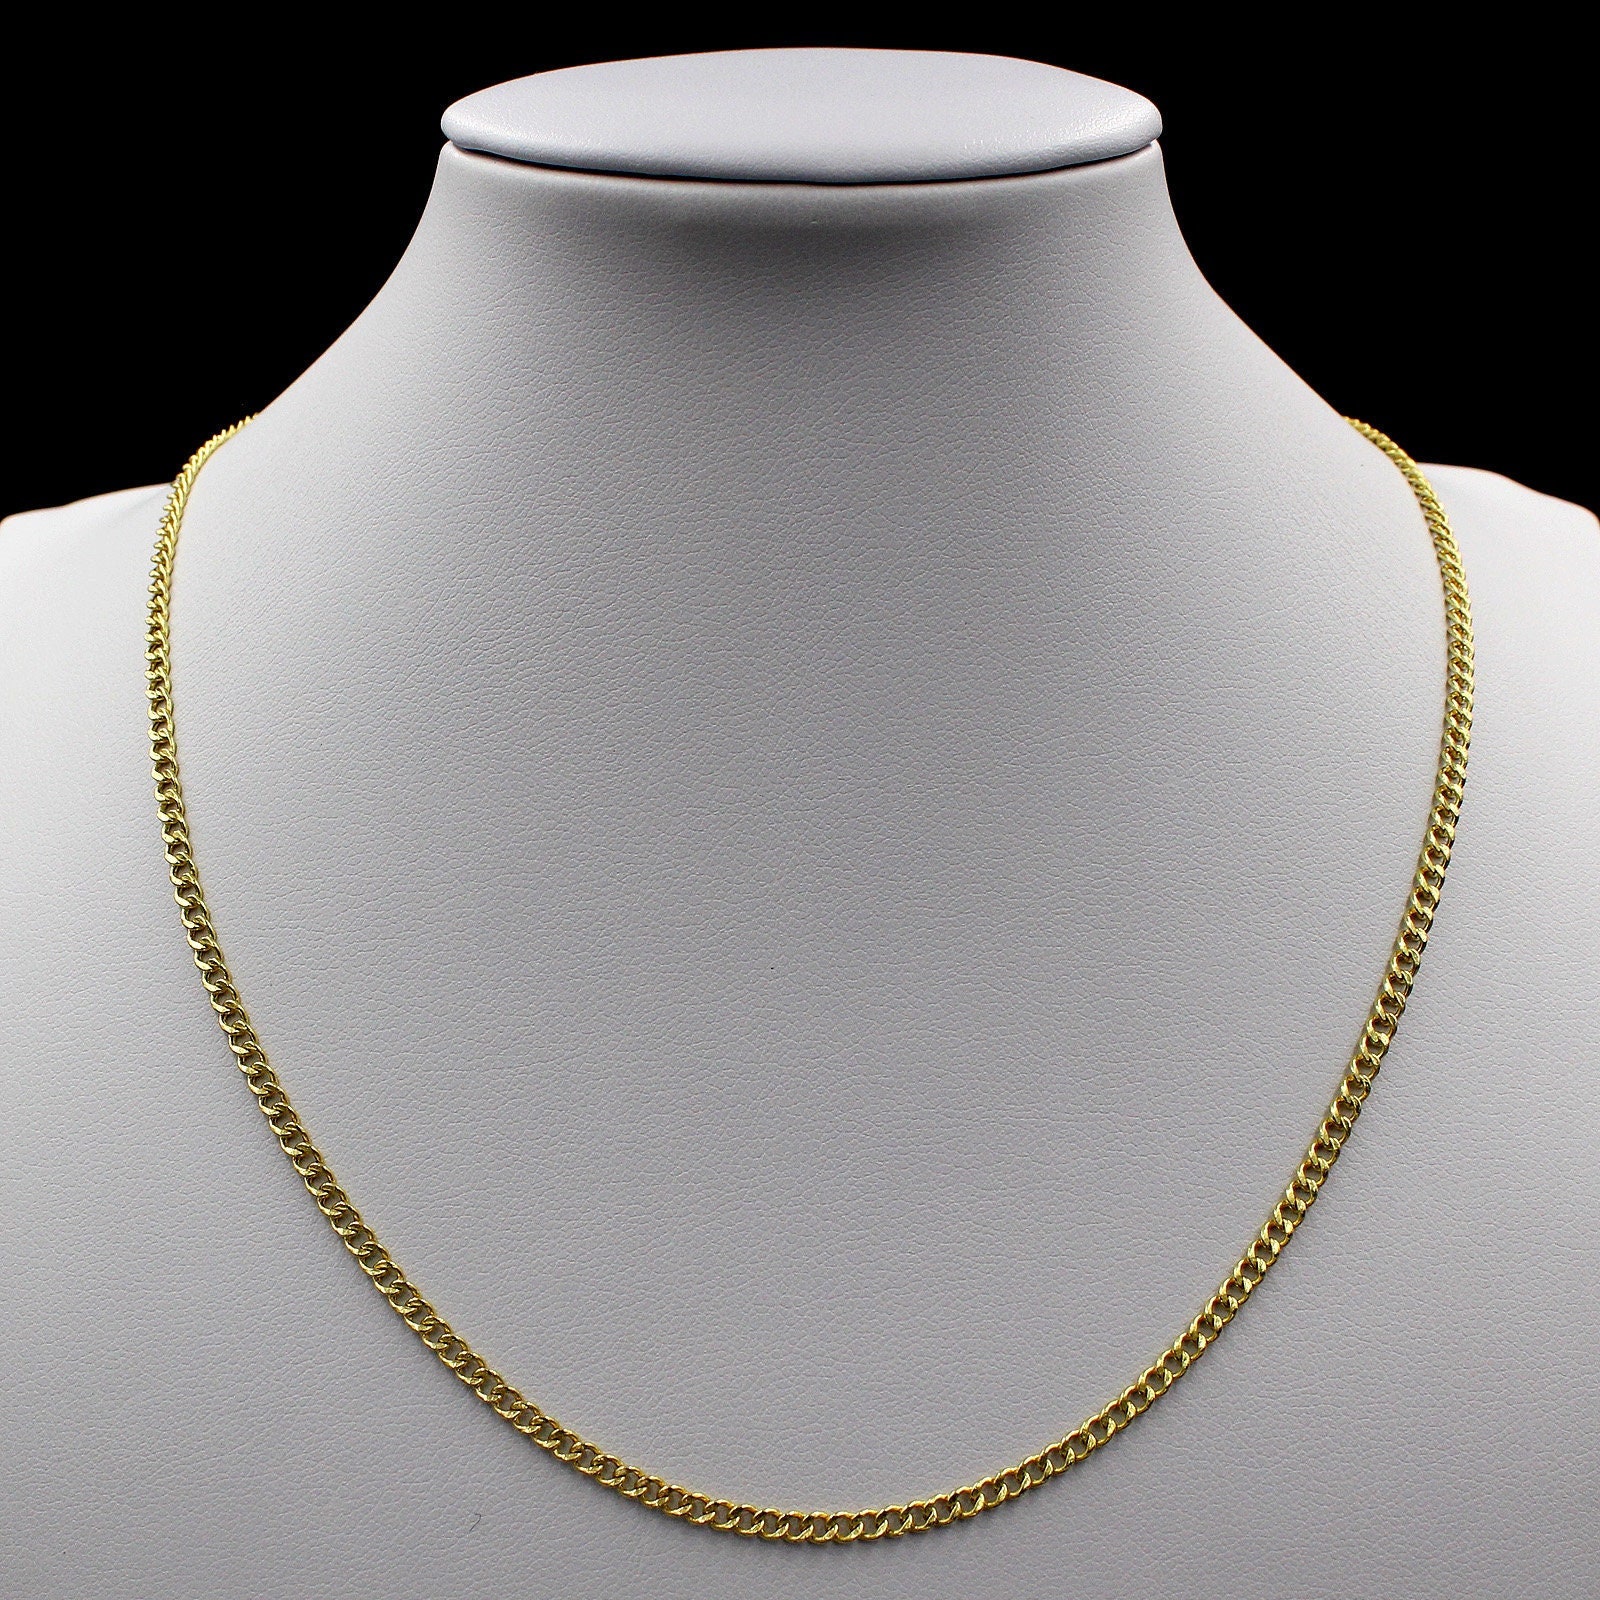 3.5mm Curb Chain Necklace, 12 14 16 Kids Cuban Link Chain, Ready to Ship, Teen Necklace, Gold Filled Necklace, Toddler Gift, Kids Jewelry